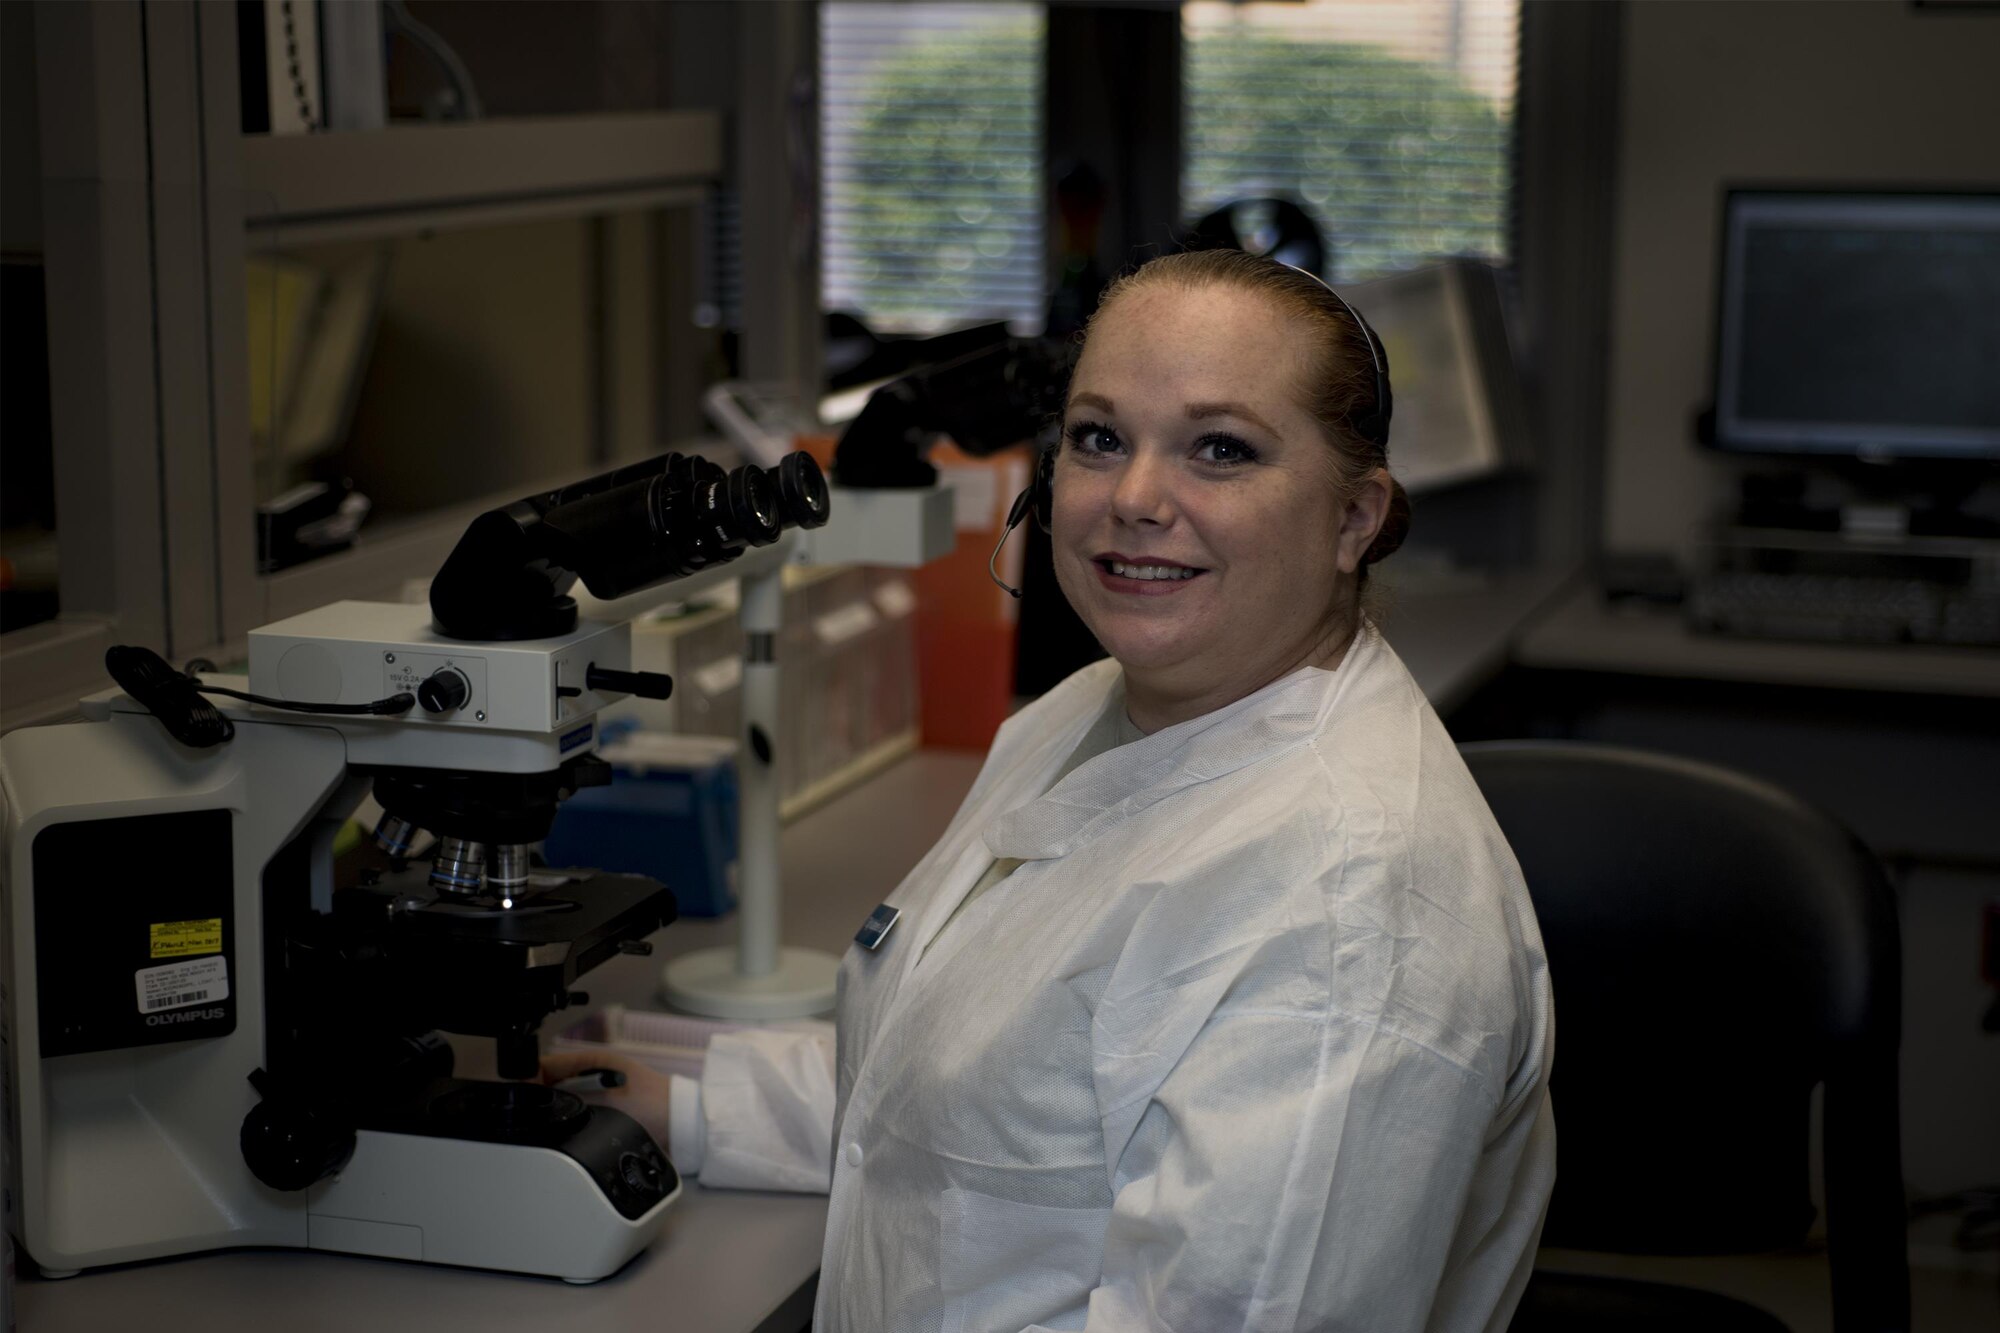 Tech Sgt. Katherine Gay, 23d Medical Support Squadron medical laboratory technician, poses for a photo next to a microscope, Jan. 19, 2016, at Moody Air Force Base, Ga. Biomedical Laboratory members perform analyses of biological materials in hospital, environmental, occupational, epidemiological, toxicological, or research and development laboratories. In the Air Force, there are currently 176 active duty, 25 Air Force reservist and 11 Air National Guard biomedical laboratory officers. (U.S. Air Force photo by Airman 1st Class Daniel Snider)